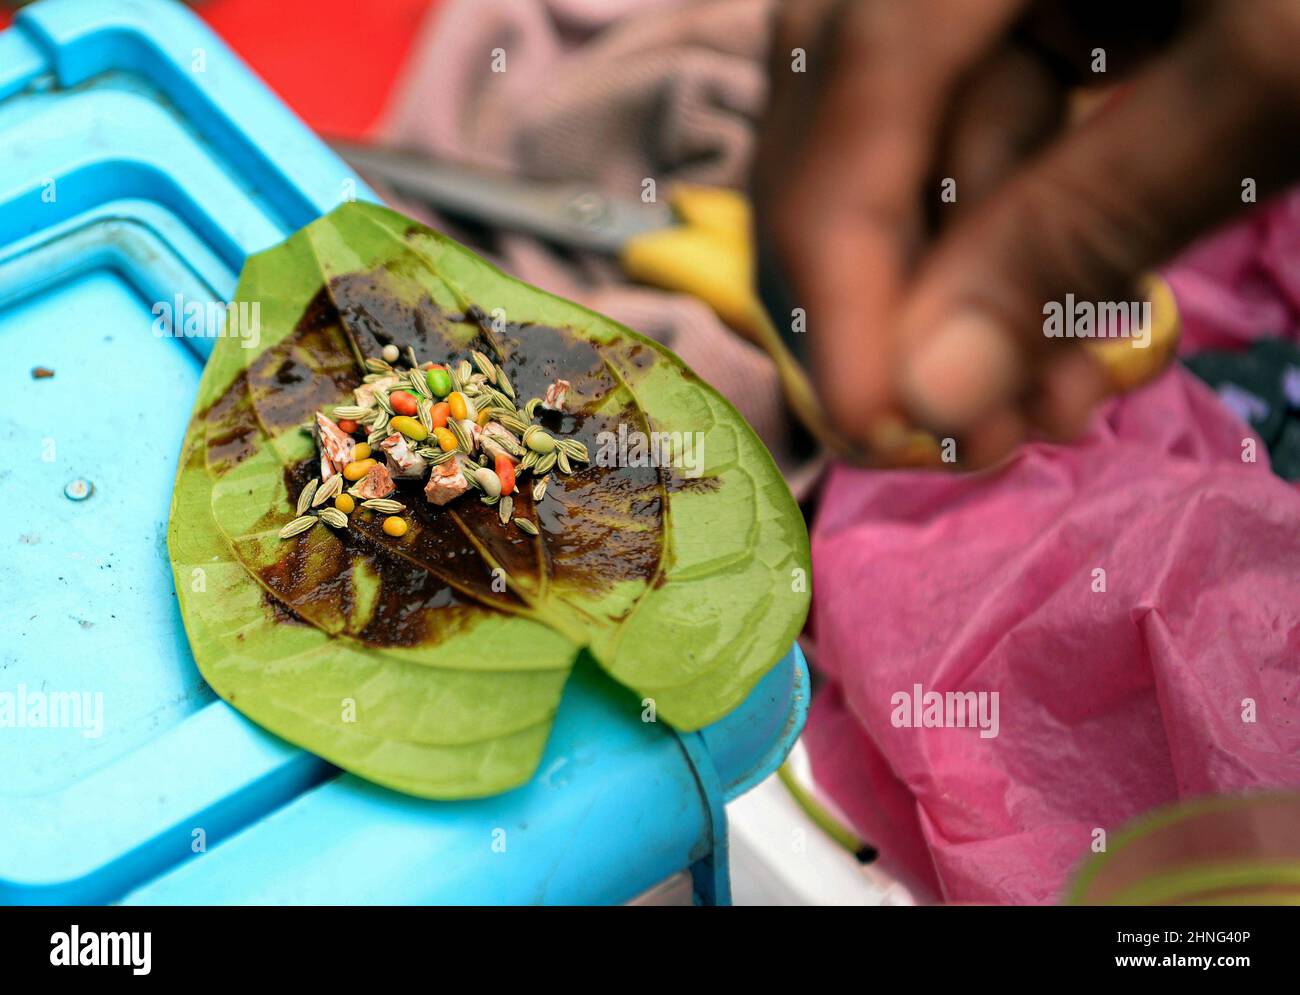 Bangkok, Thailand. 16th Feb, 2022. A close-up of a meetha paan, made of betel leaves filled with a range of sweet jam-like spreads and crunchy titbits like tutti-frutti, cherries, chopped dates, filled with chopped betel (areca) nut (Areca catechu) and slaked lime (chuna; calcium hydroxide) in Little India, Phahurat Market.The area is a 5 minutes walk from Bangkok's Chinatown and boasts the economy of a large northwestern Sikh community. (Photo by Paul Lakatos/SOPA Images/Sipa USA) Credit: Sipa USA/Alamy Live News Stock Photo